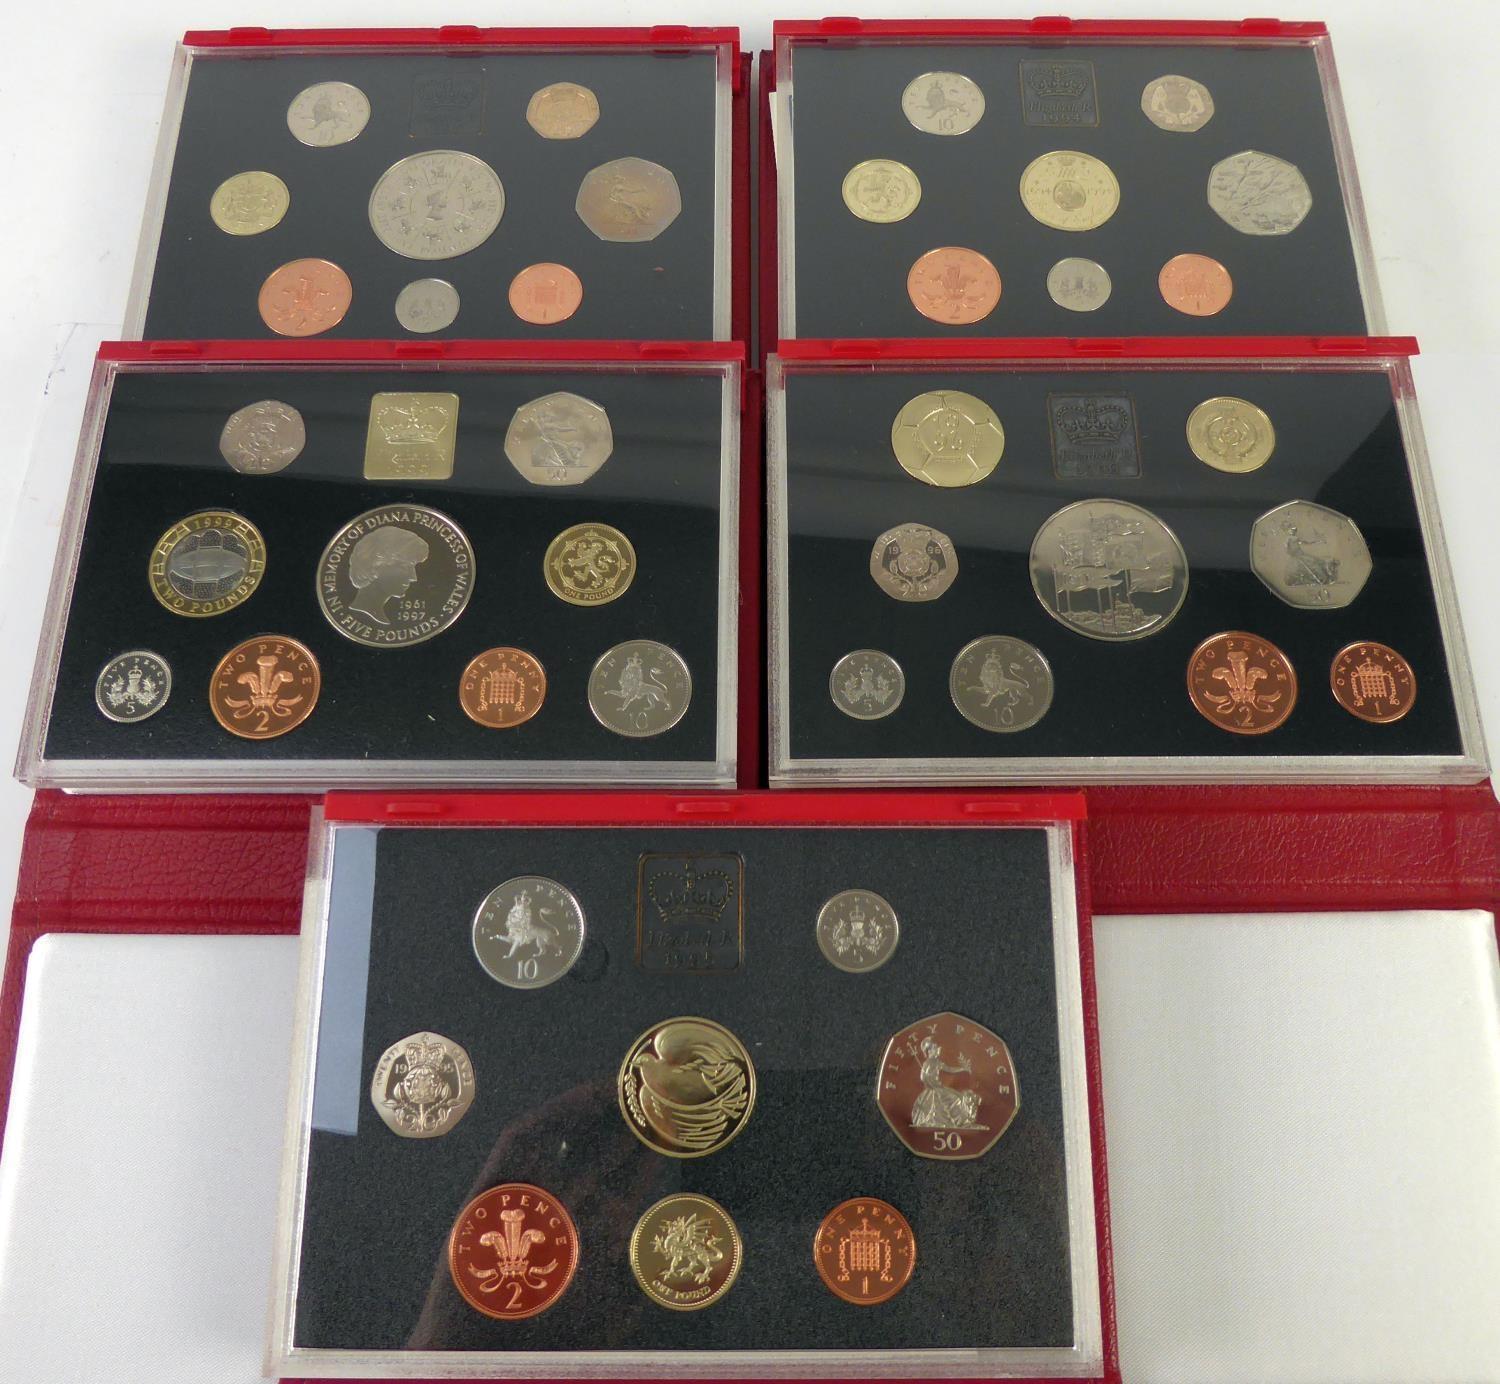 ROYAL MINT ISSUED COMMEMORATIVE COIN SETS 1990-1999, in original boxes unused (6) - Image 2 of 2